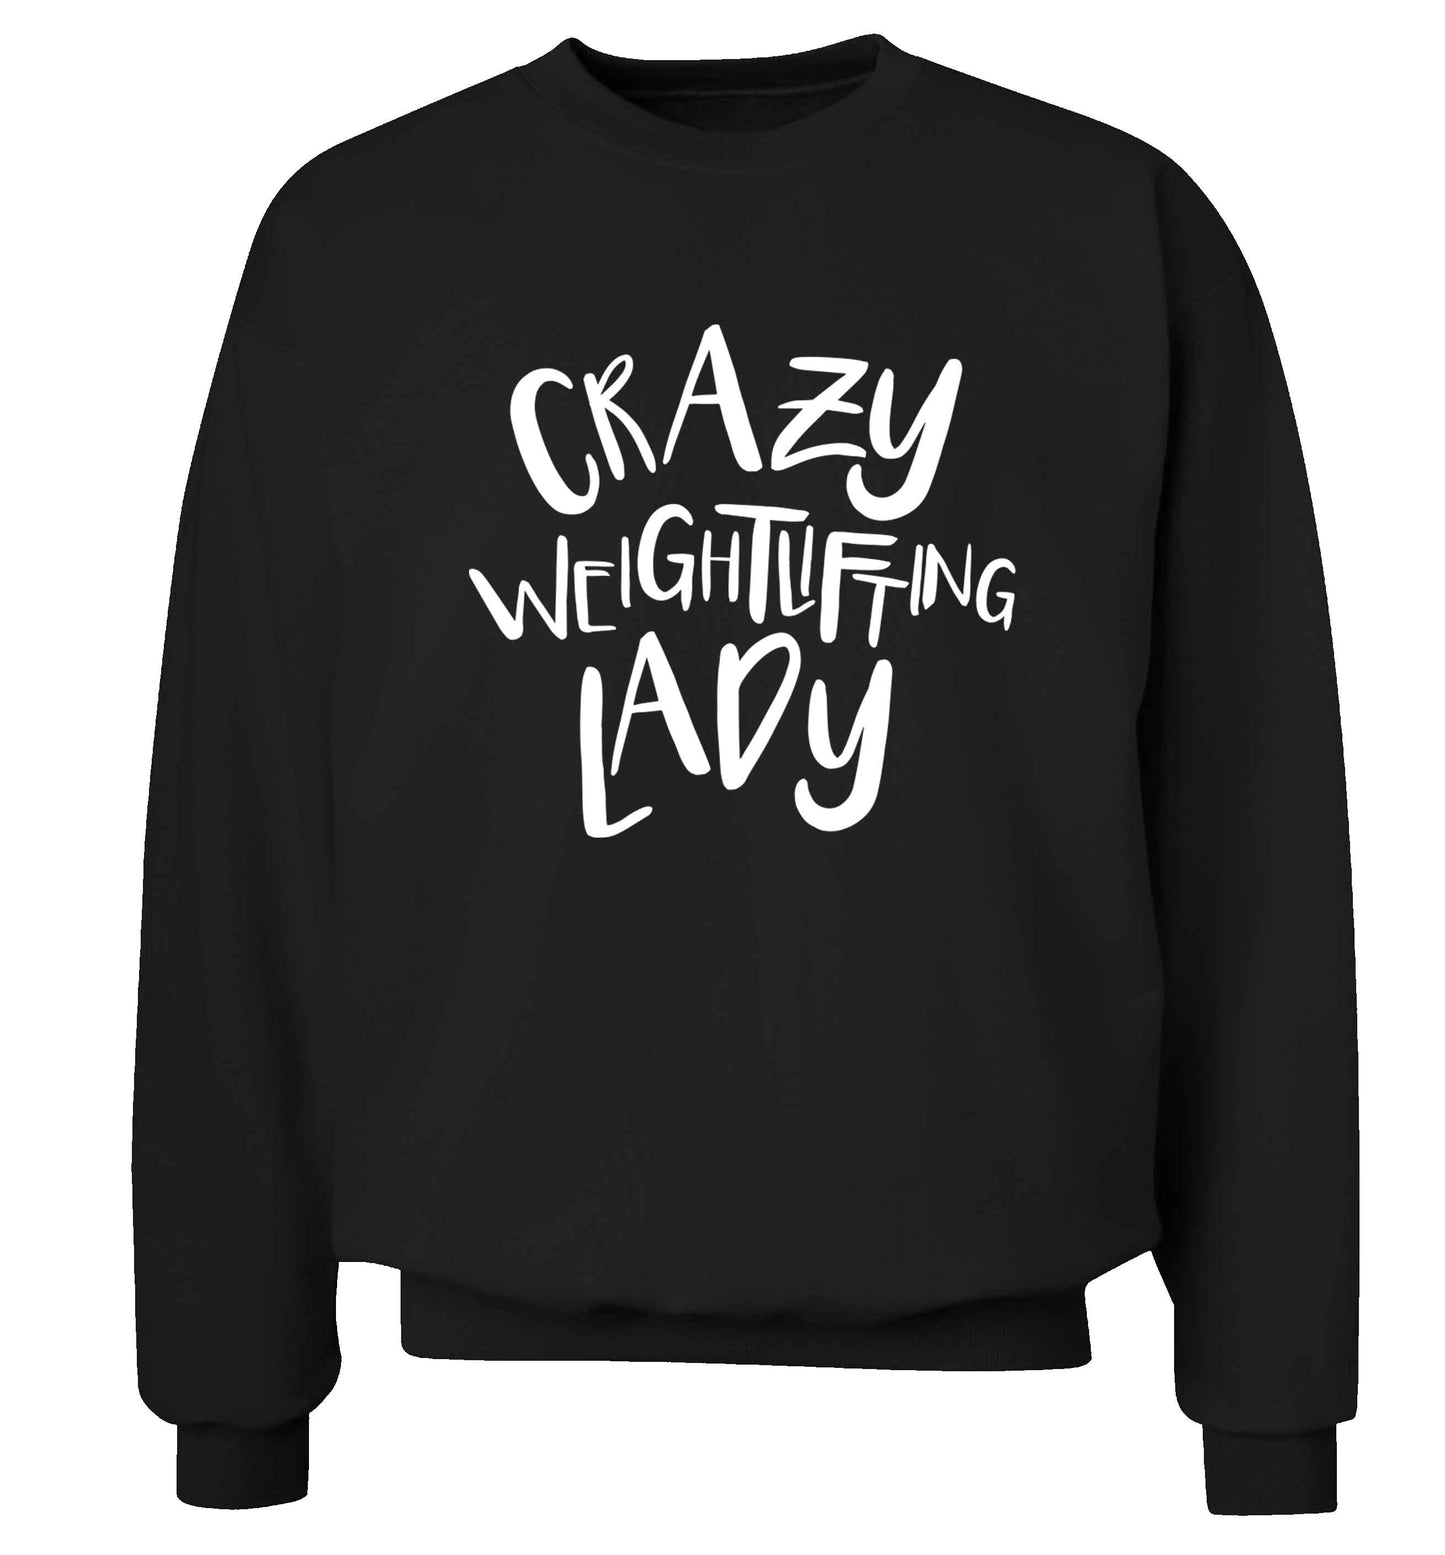 Crazy weightlifting lady Adult's unisex black Sweater 2XL